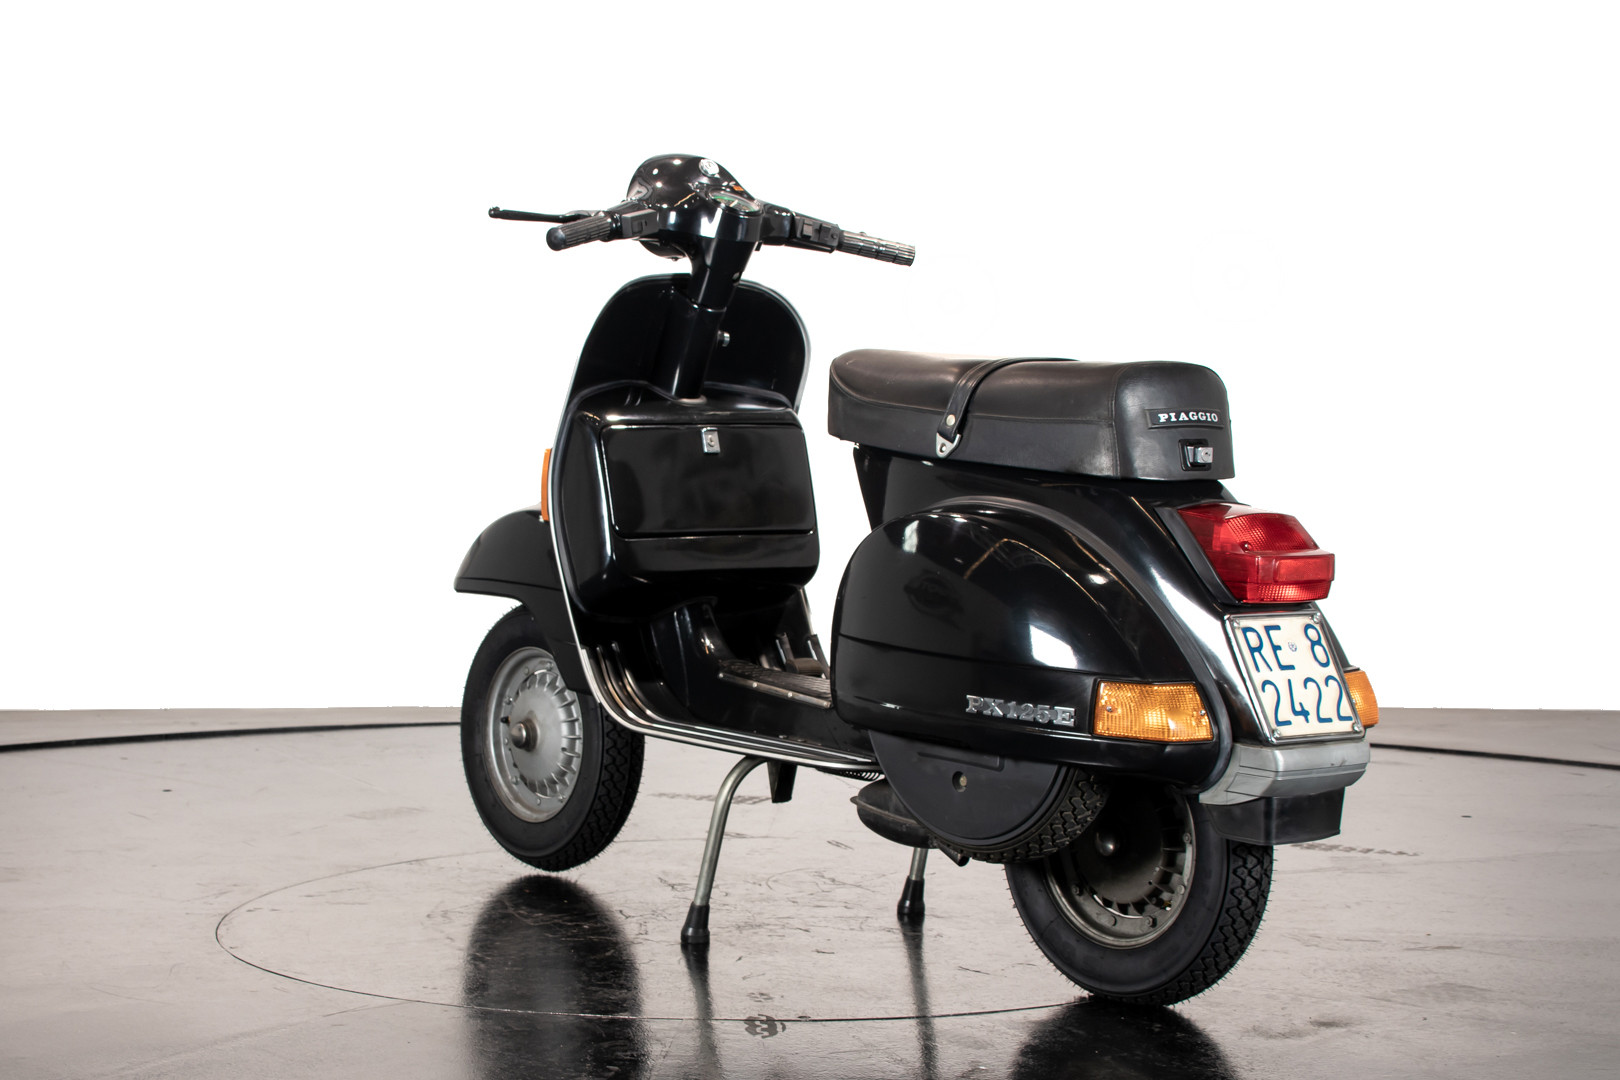 1984 vespa px 125 with mallossi 166 kit | in Southsea 